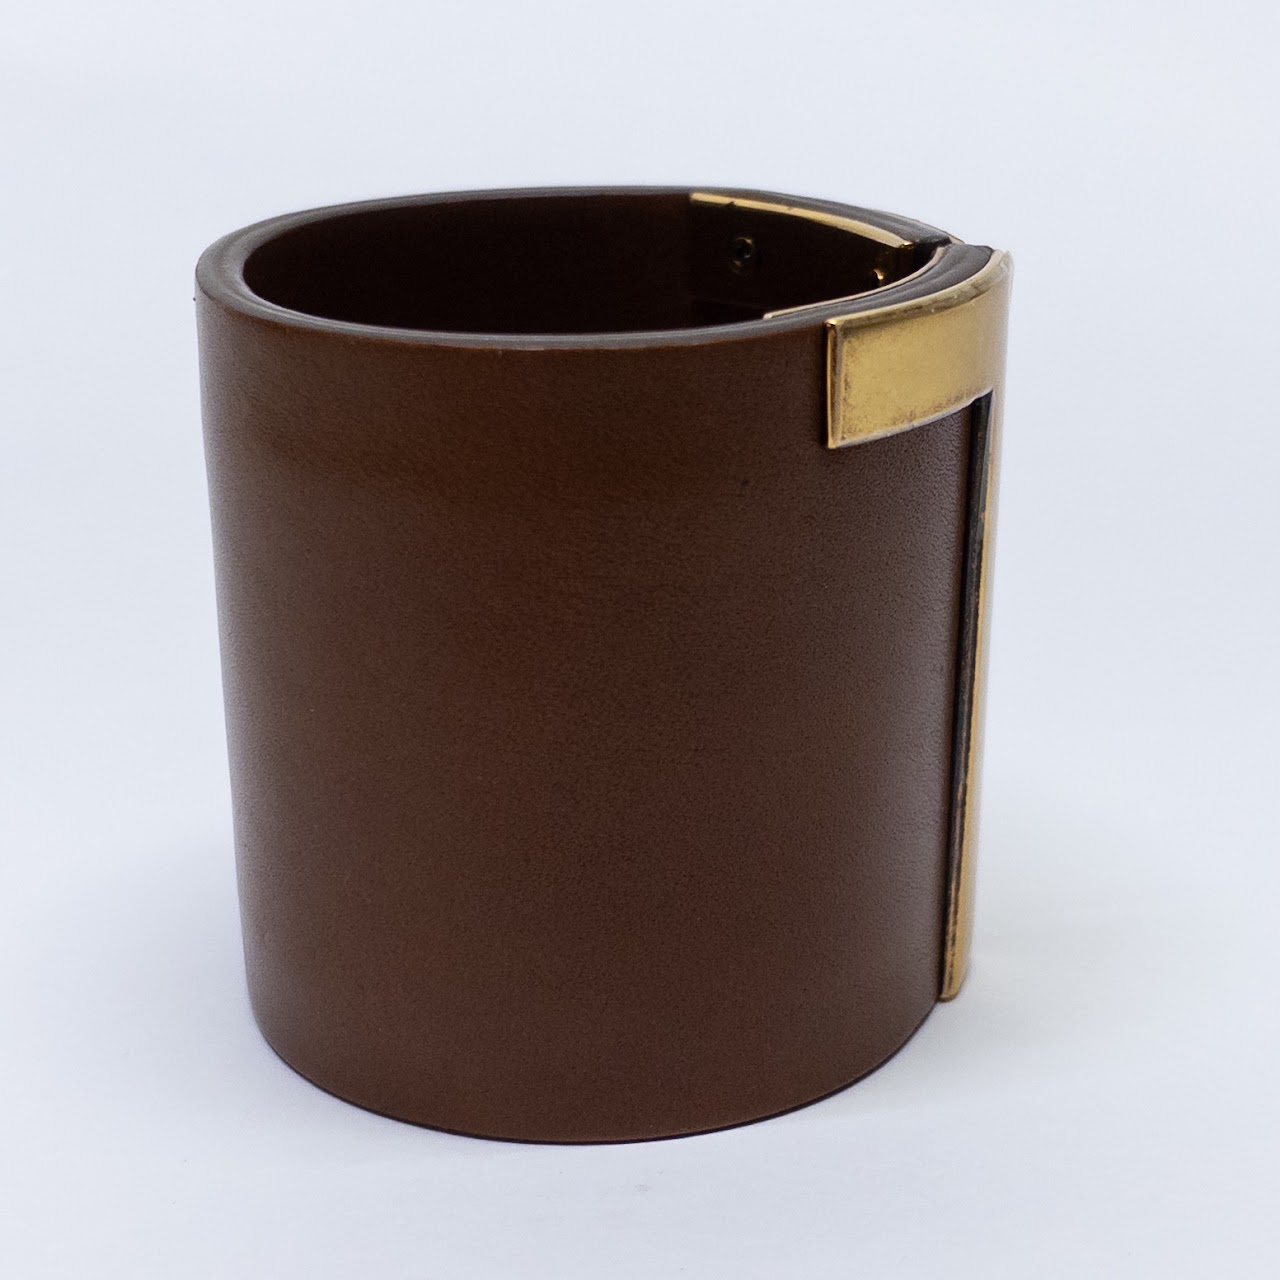 Tom Ford Leather and Brass Open Cuff